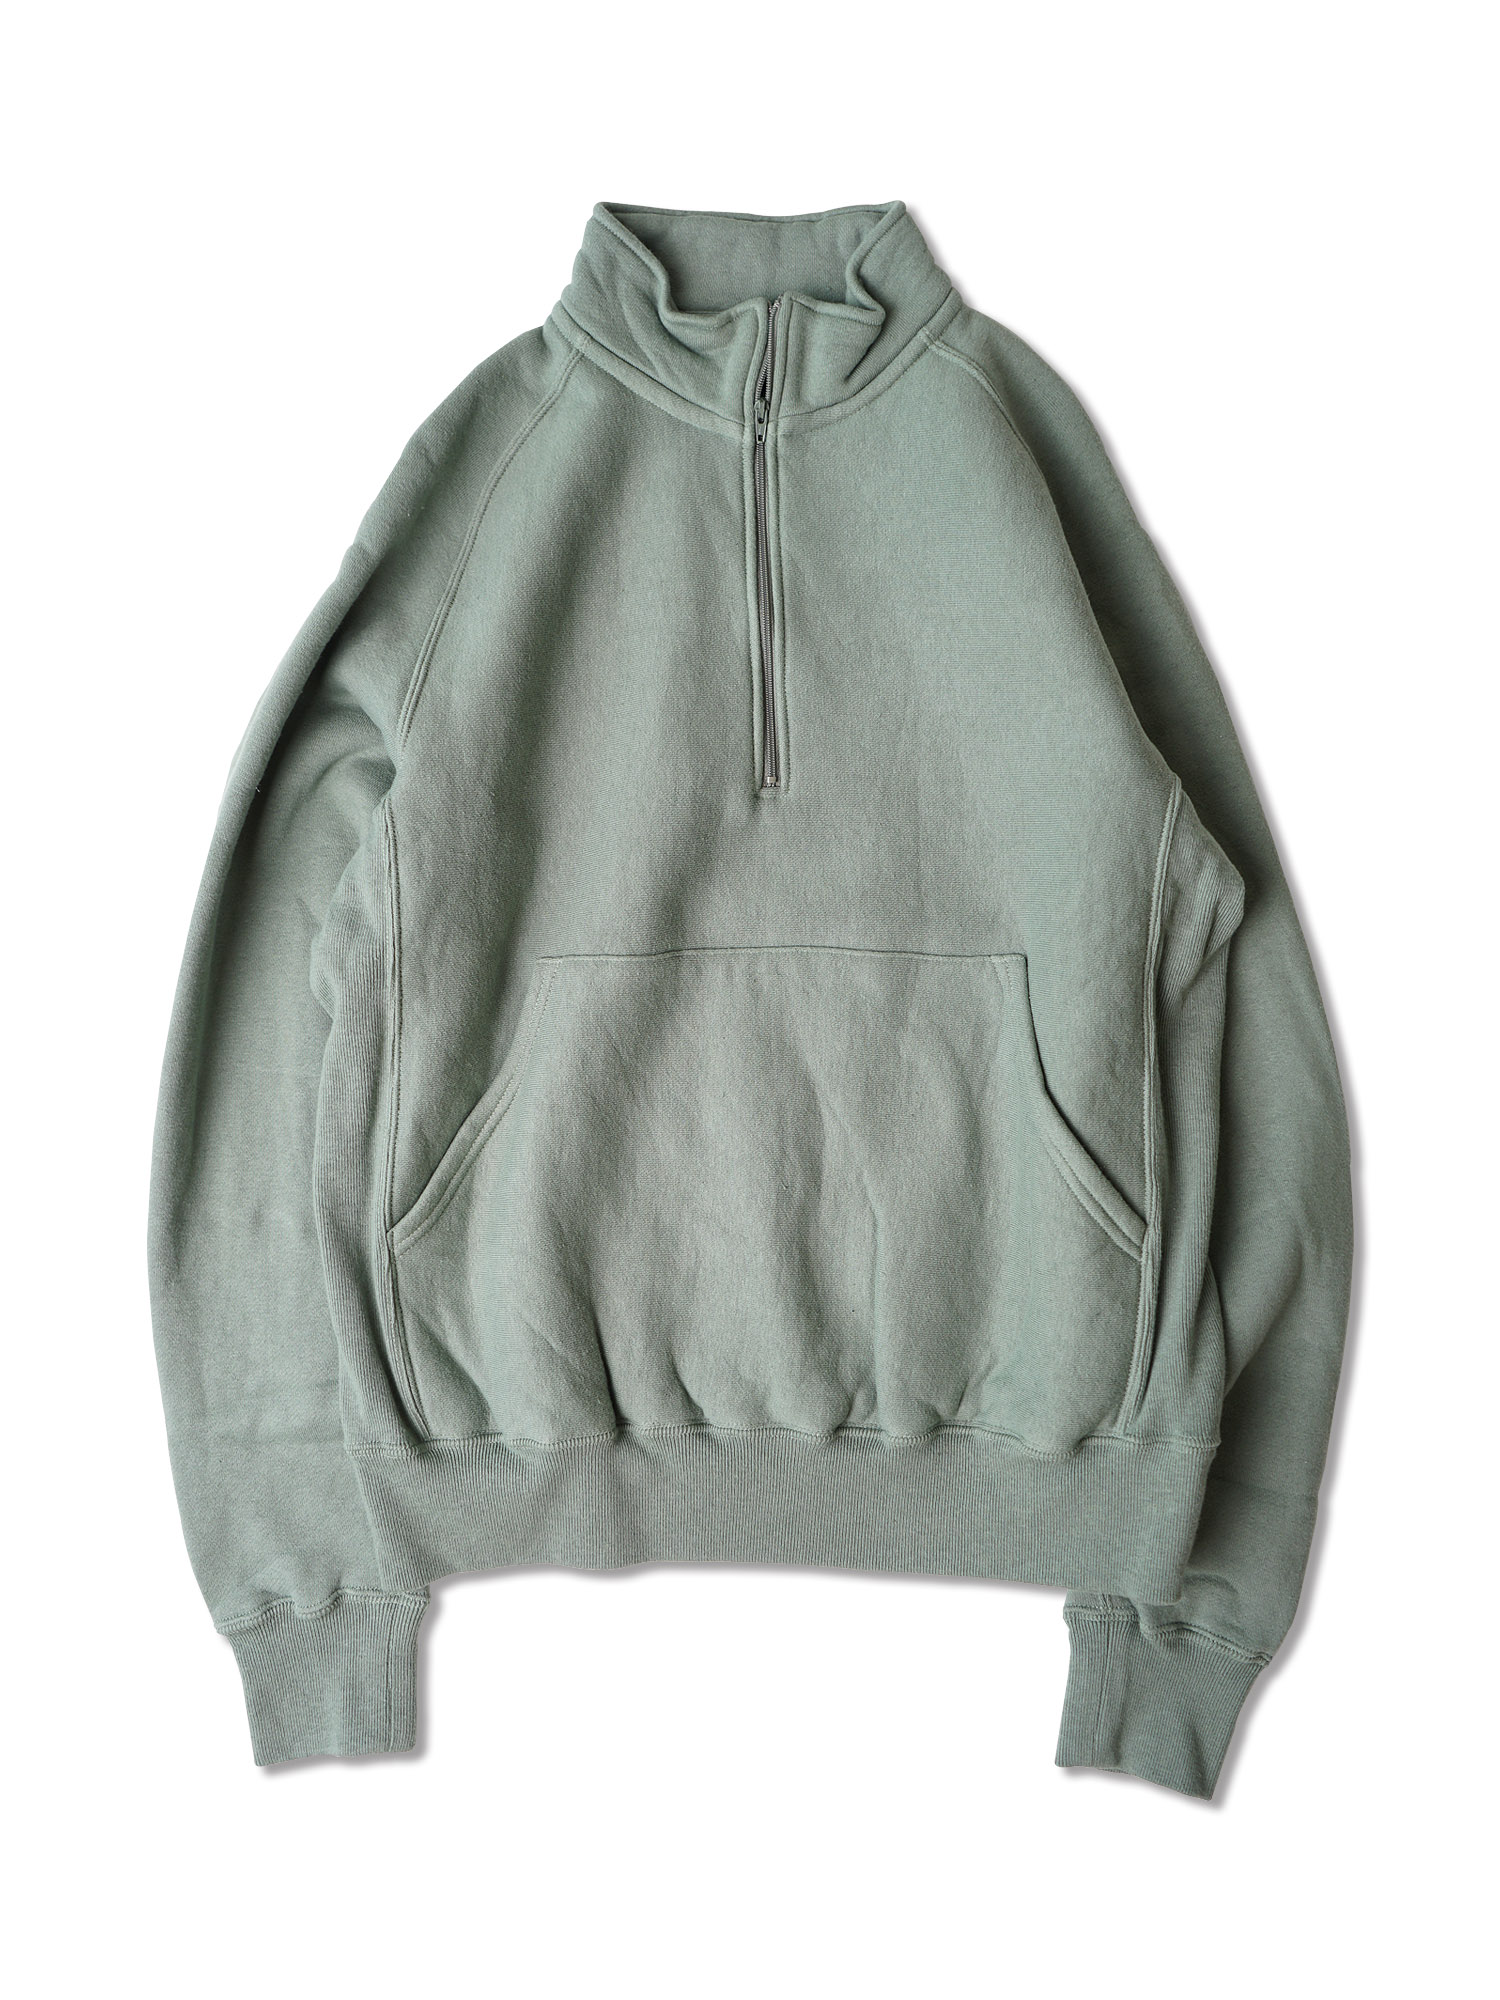 ENDS and MEANS half zip sweat (3color)